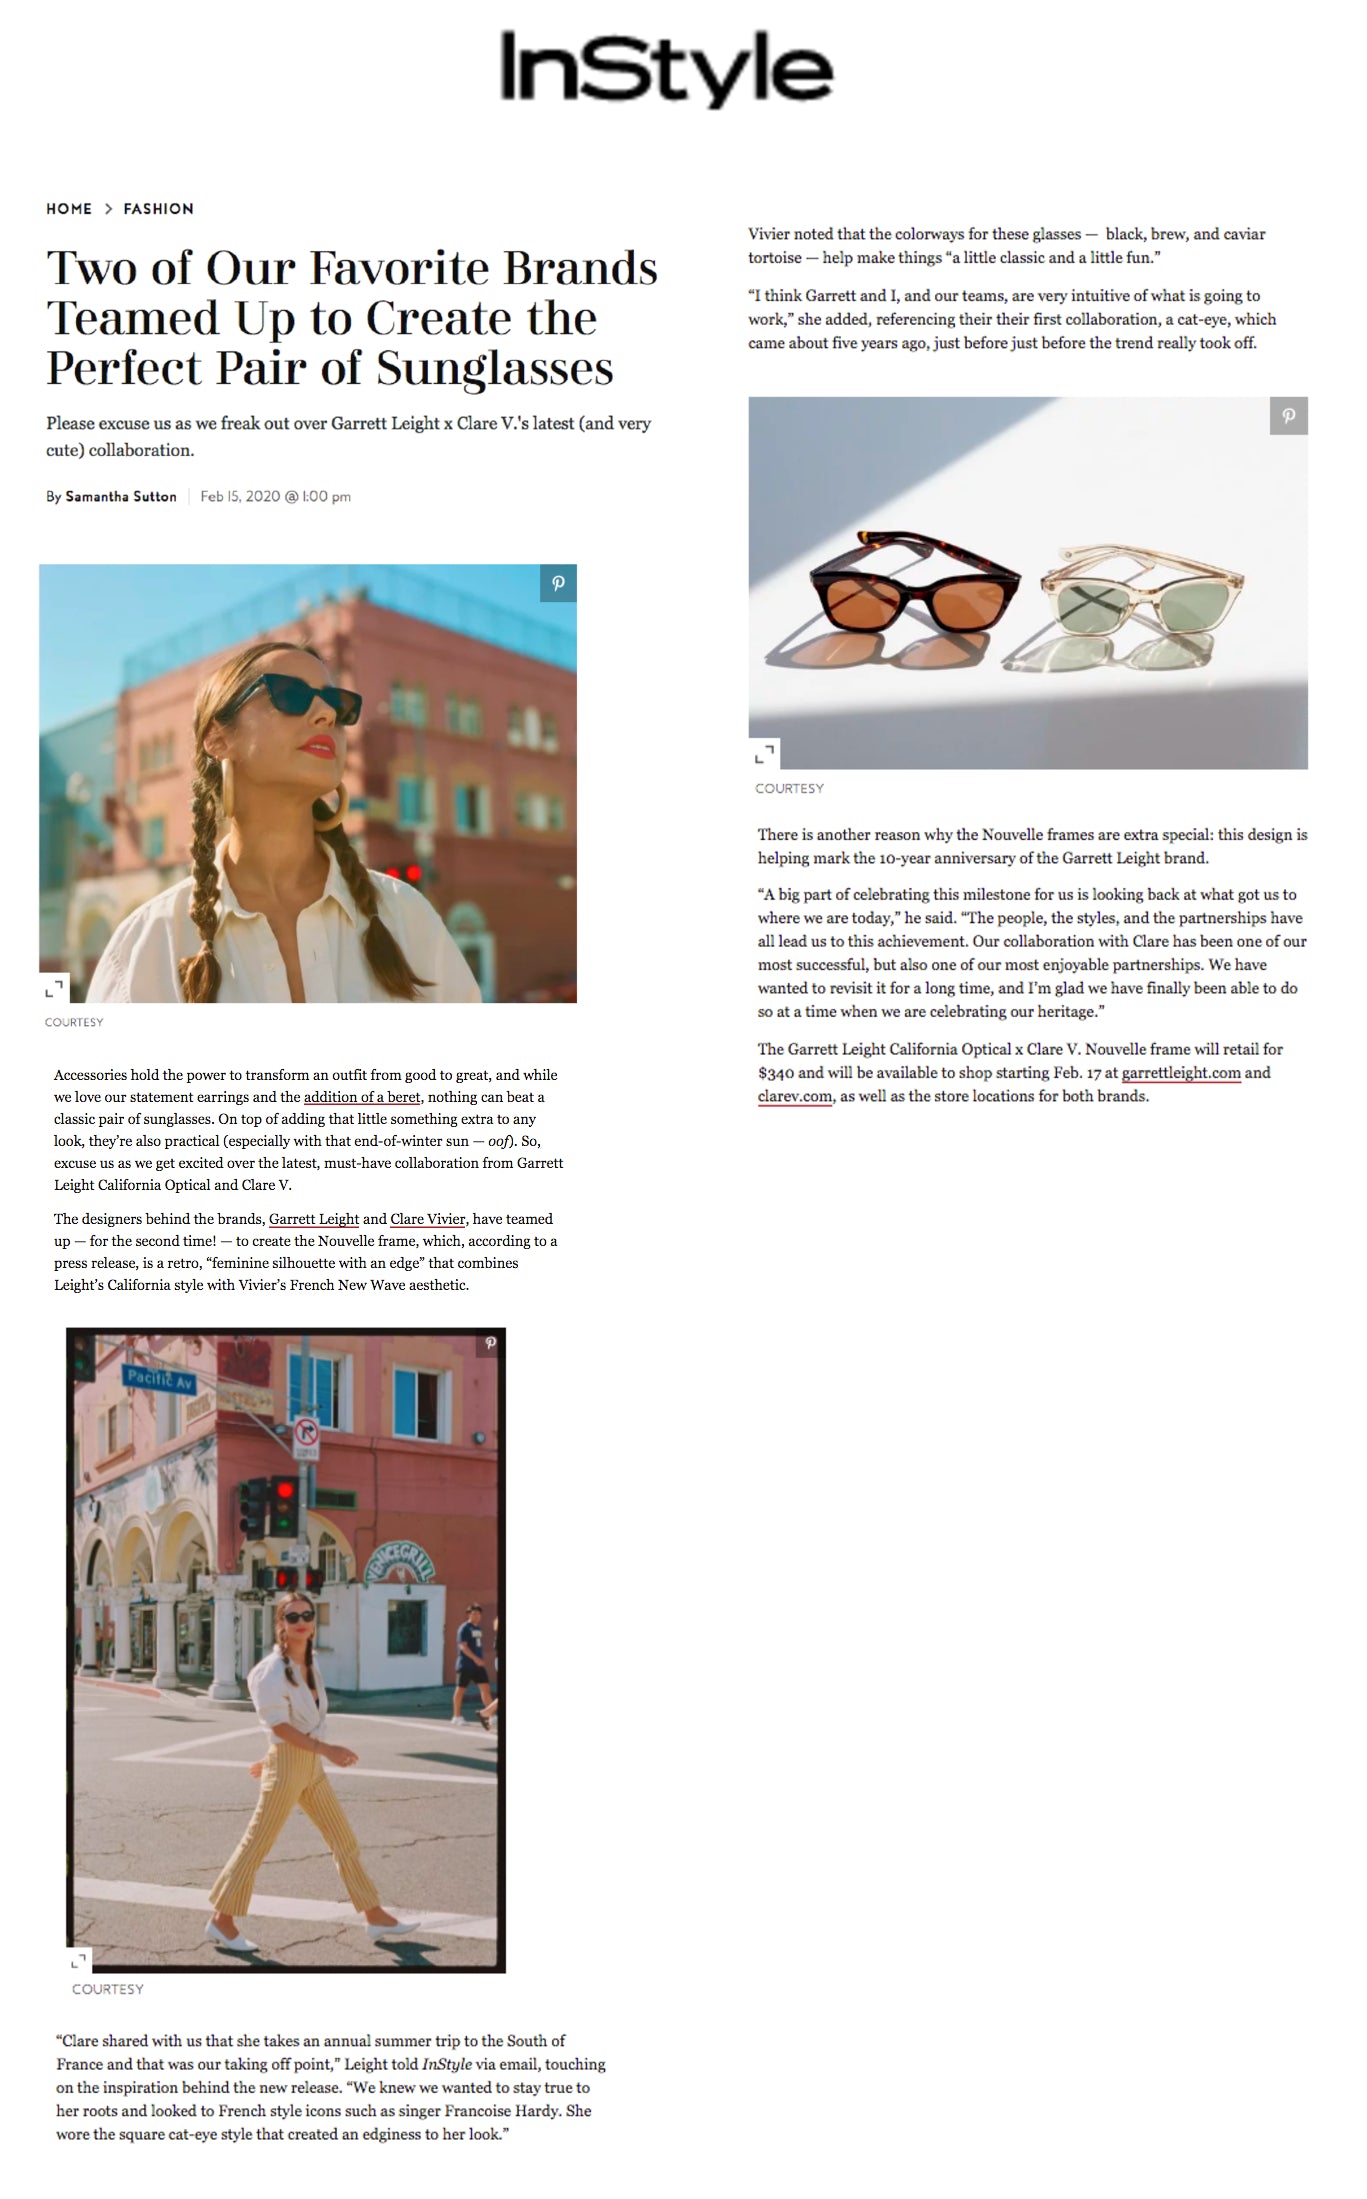 In Style Magazine Two Of Our Favorite Brands Teamed Up to Create the Perfect Pair of Sunglasses Featuring Our Clare v. x Garrett Leight Collaboration 